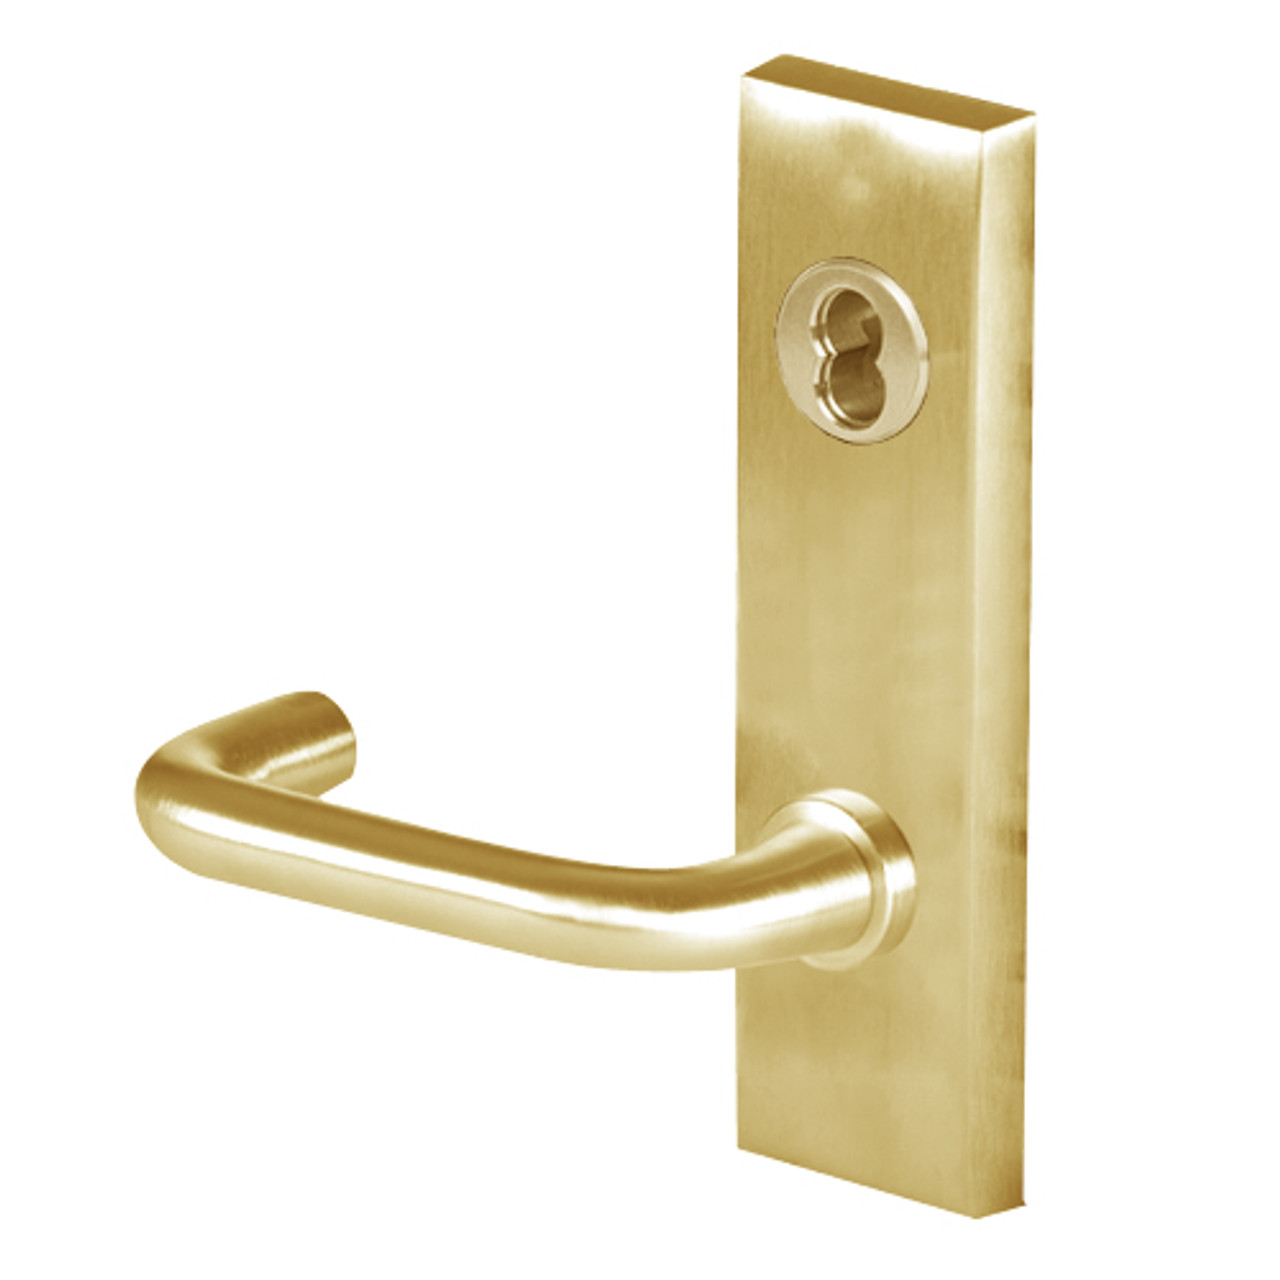 45H7B3M606 Best 40H Series Entrance with Deadbolt Heavy Duty Mortise Lever Lock with Solid Tube Return Style in Satin Brass